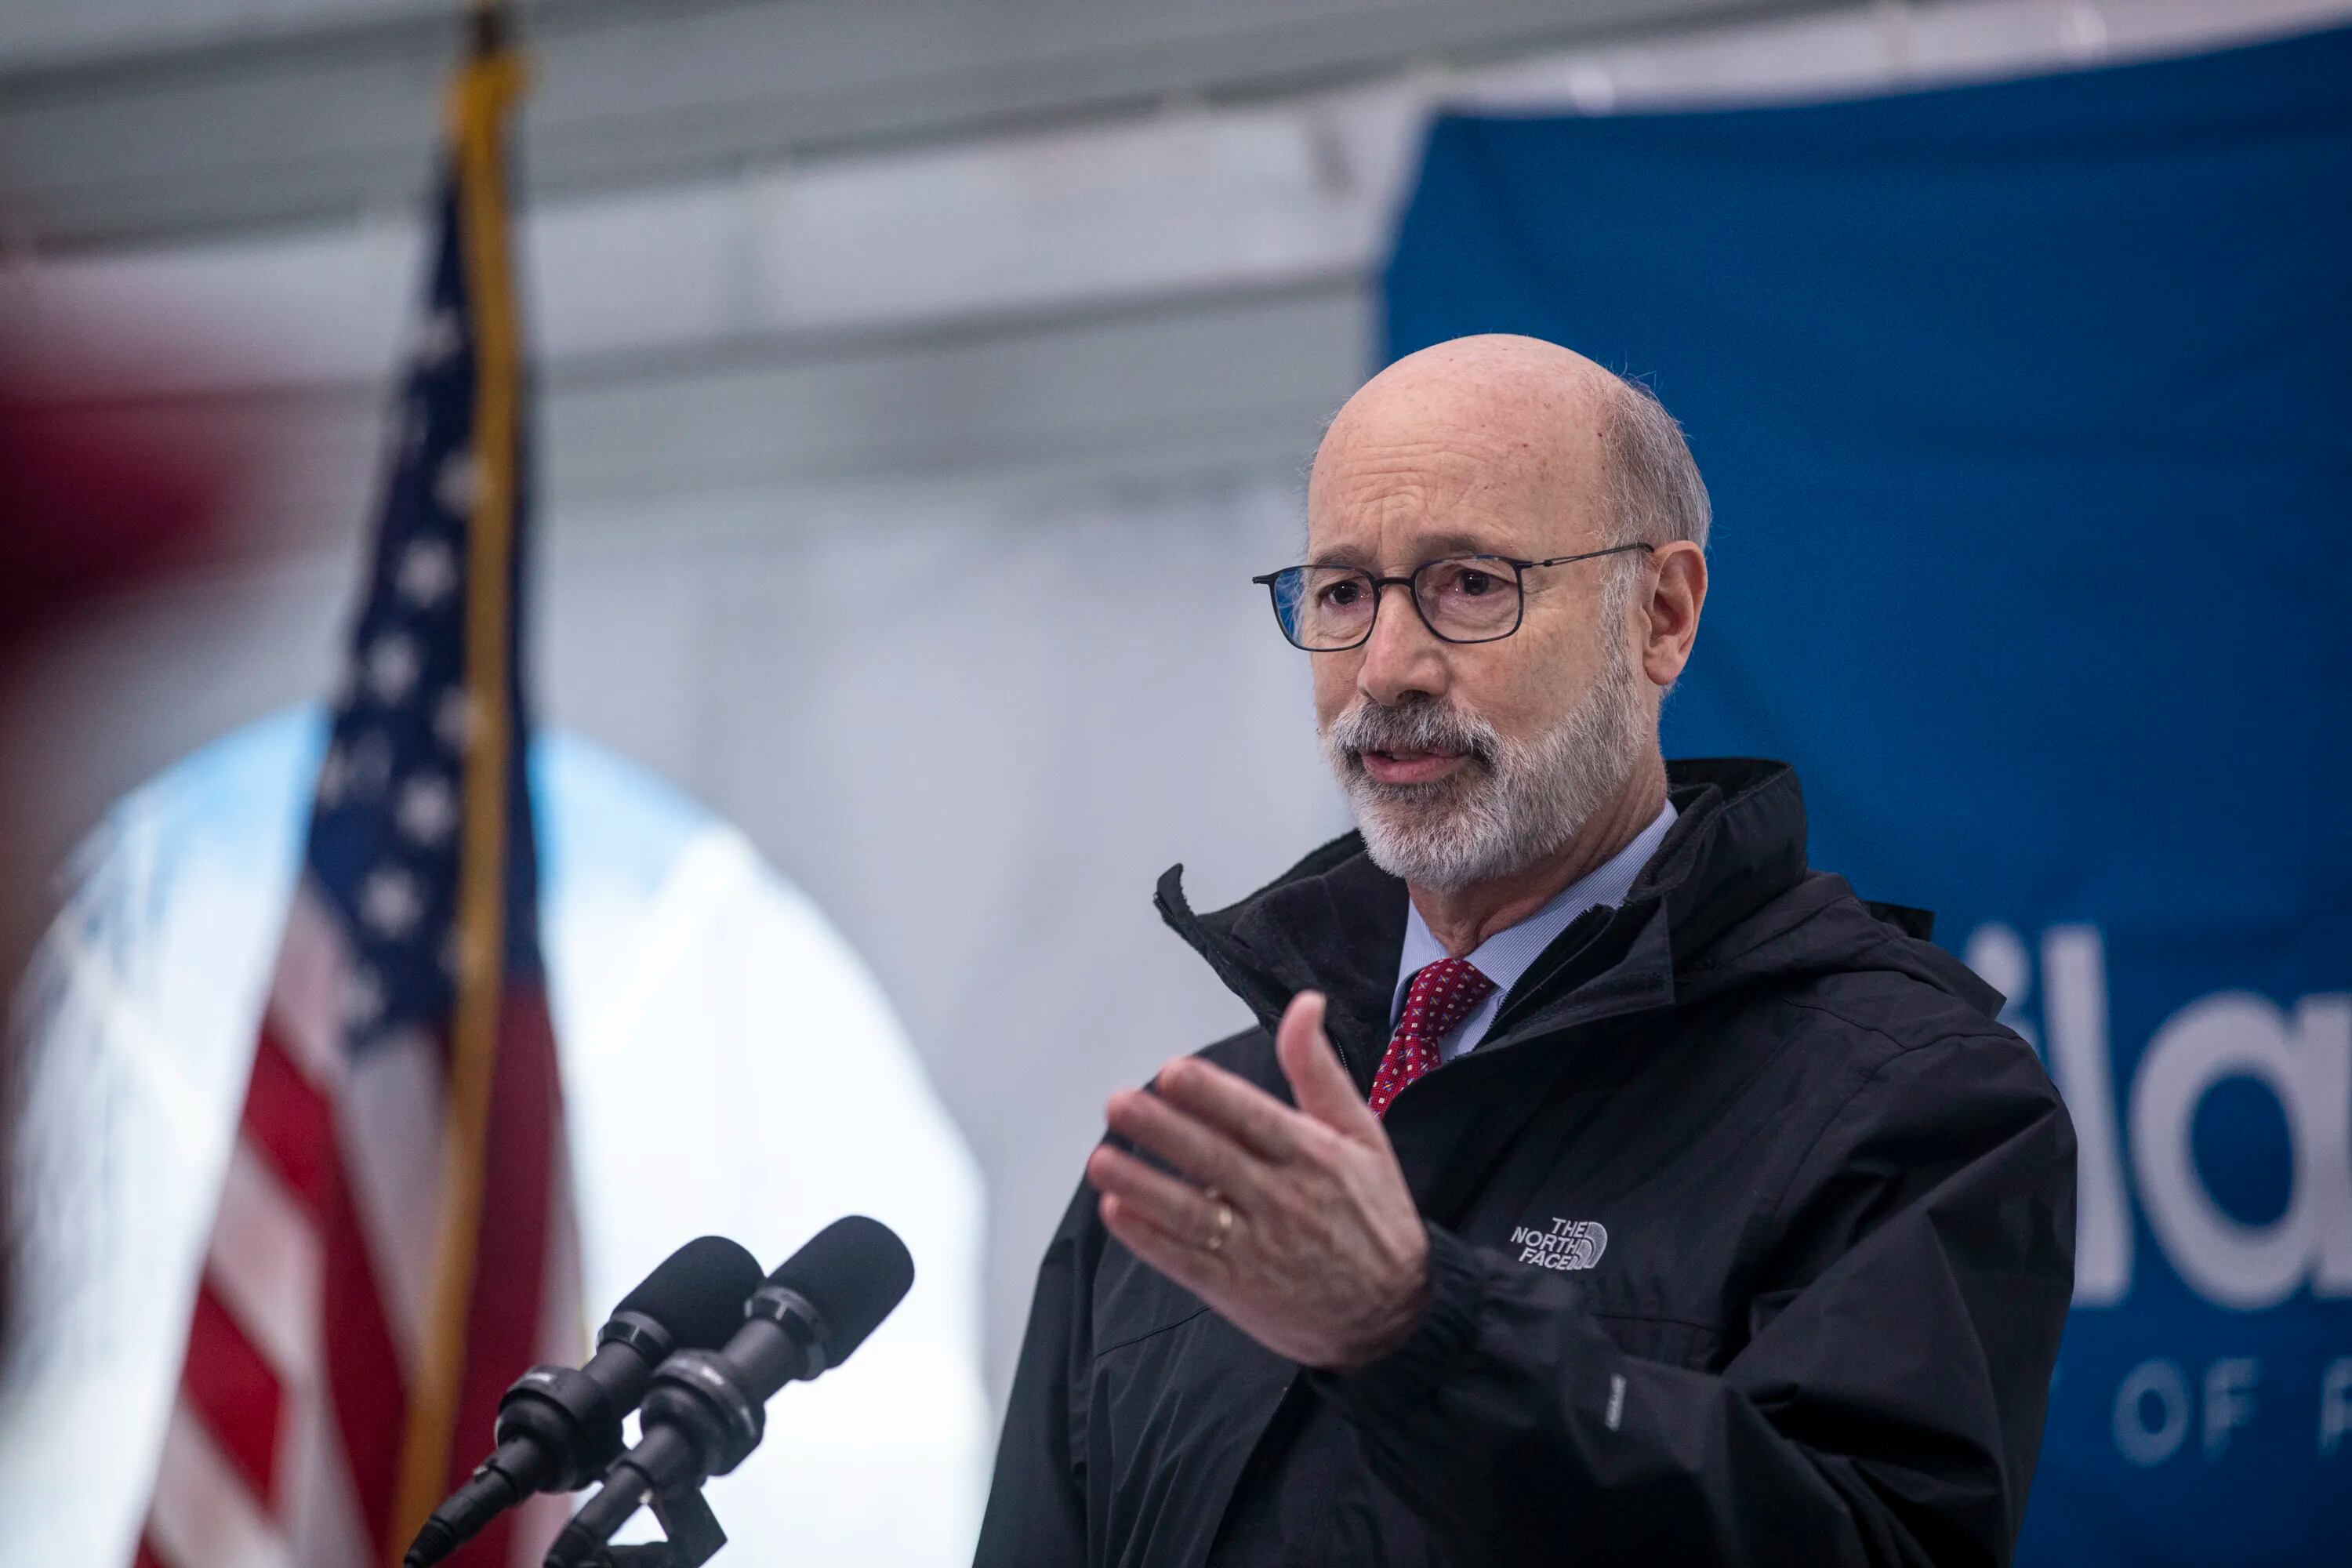 Gov. Tom Wolf announces a new round of investment in PhilaPort at the Packer Avenue Marine Terminal in Philadelphia on Feb. 4, 2022.